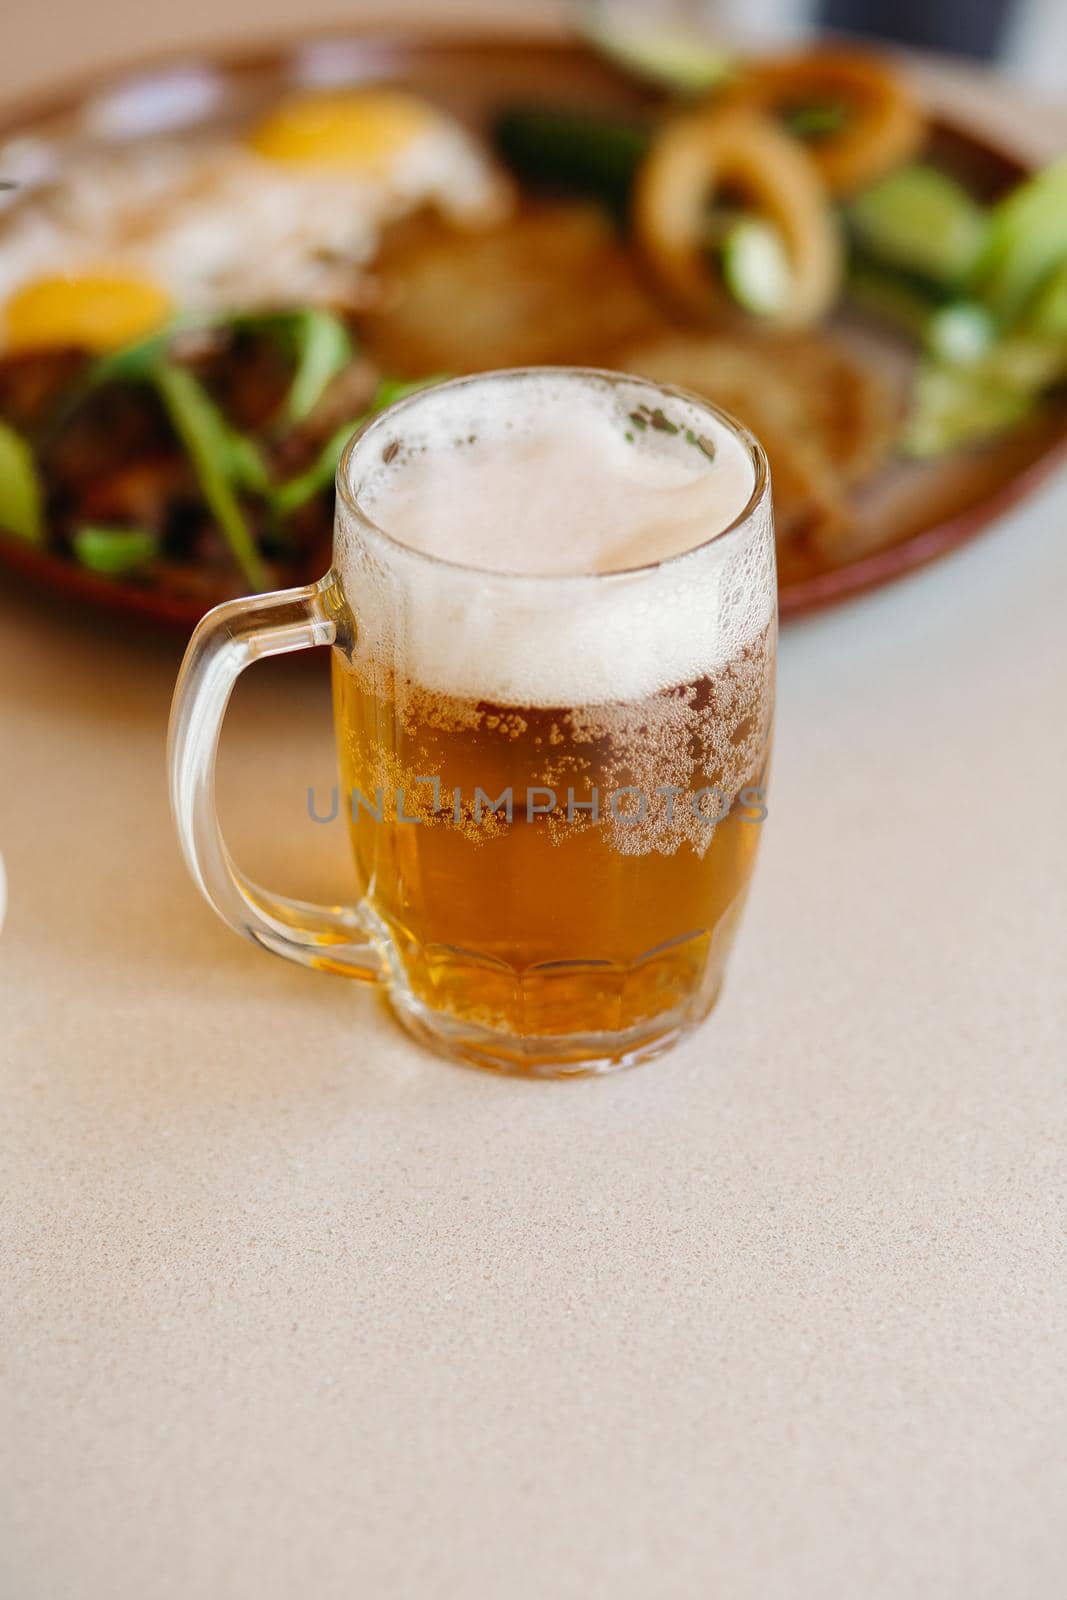 Vertical shot of cold beer cup standing near appetizers plate. by StudioLucky